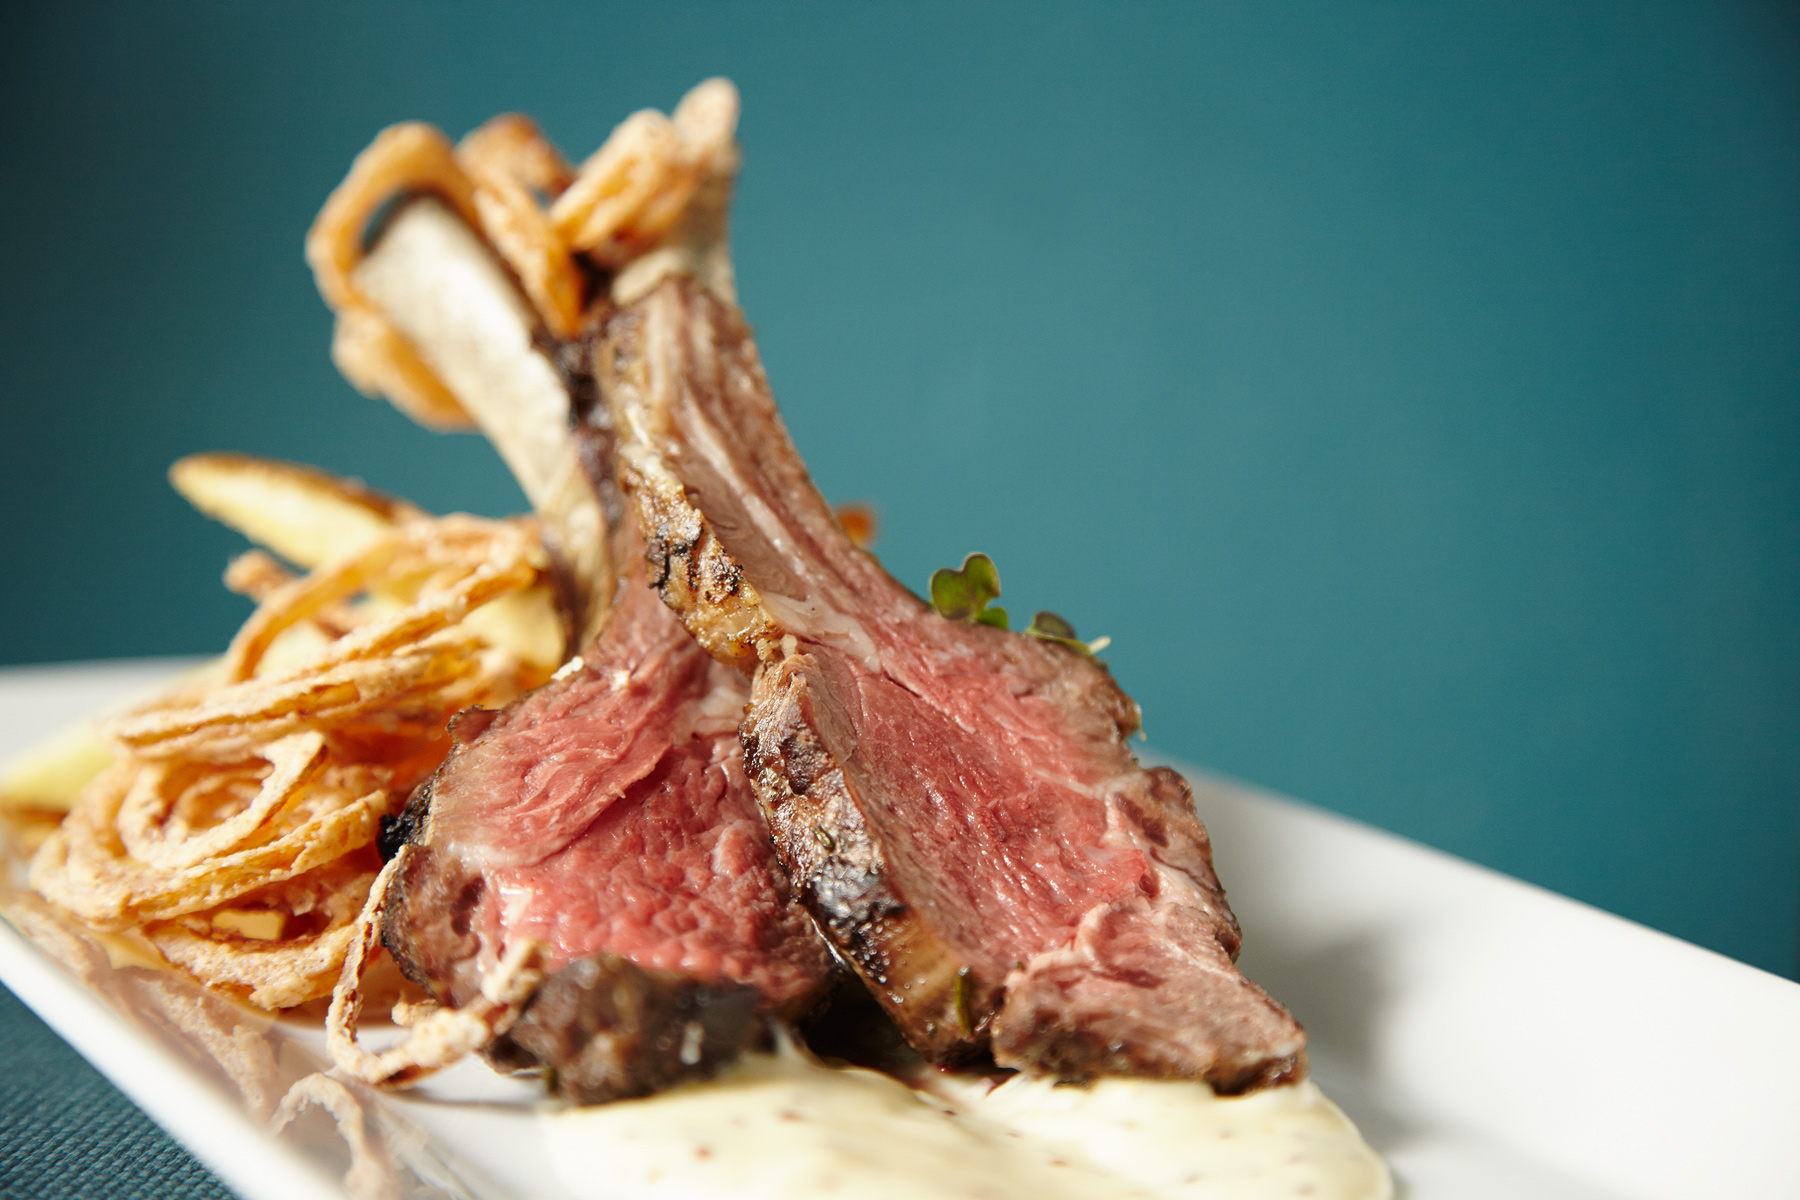 Lamb Chops photo by Chris Kessler Photography.  Chris Kessler is a freelance Photographer based in Milwaukee Wisconsin. Specializing in Food photography and portraiture.